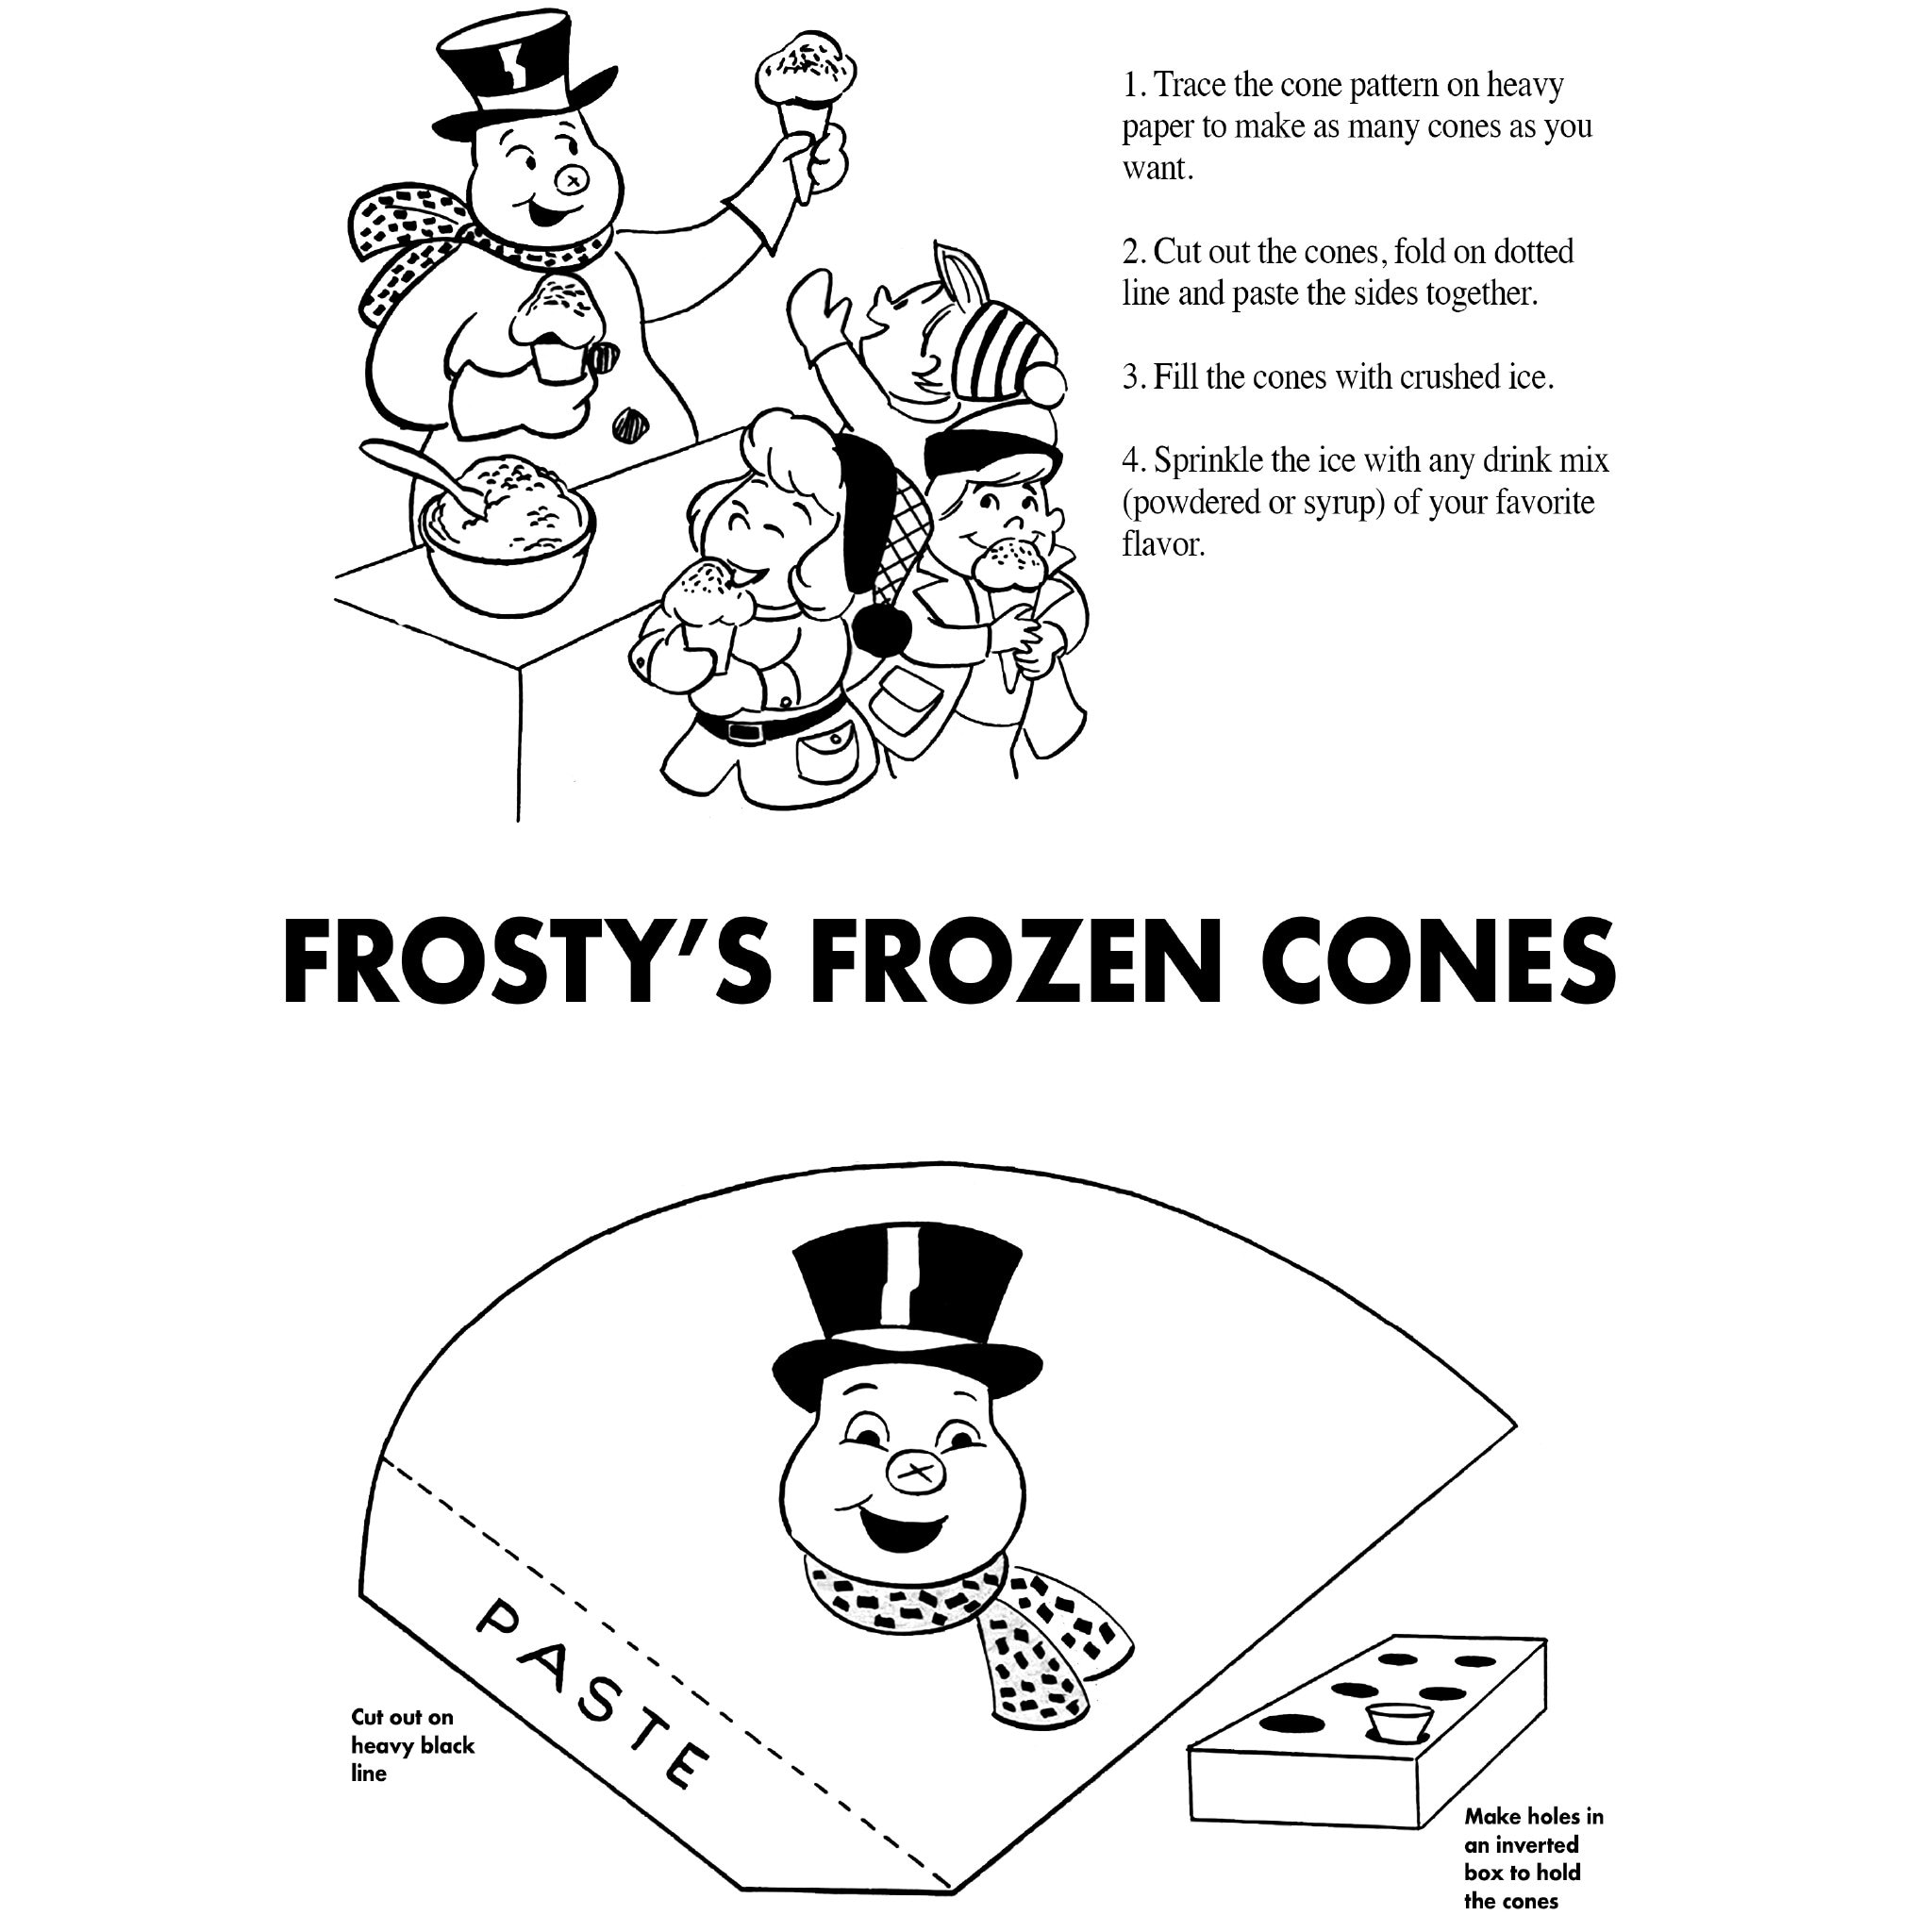 Frosty the snowman christmas ic coloring activity book printable pdf instant digital download pages of frosty art for kids to color